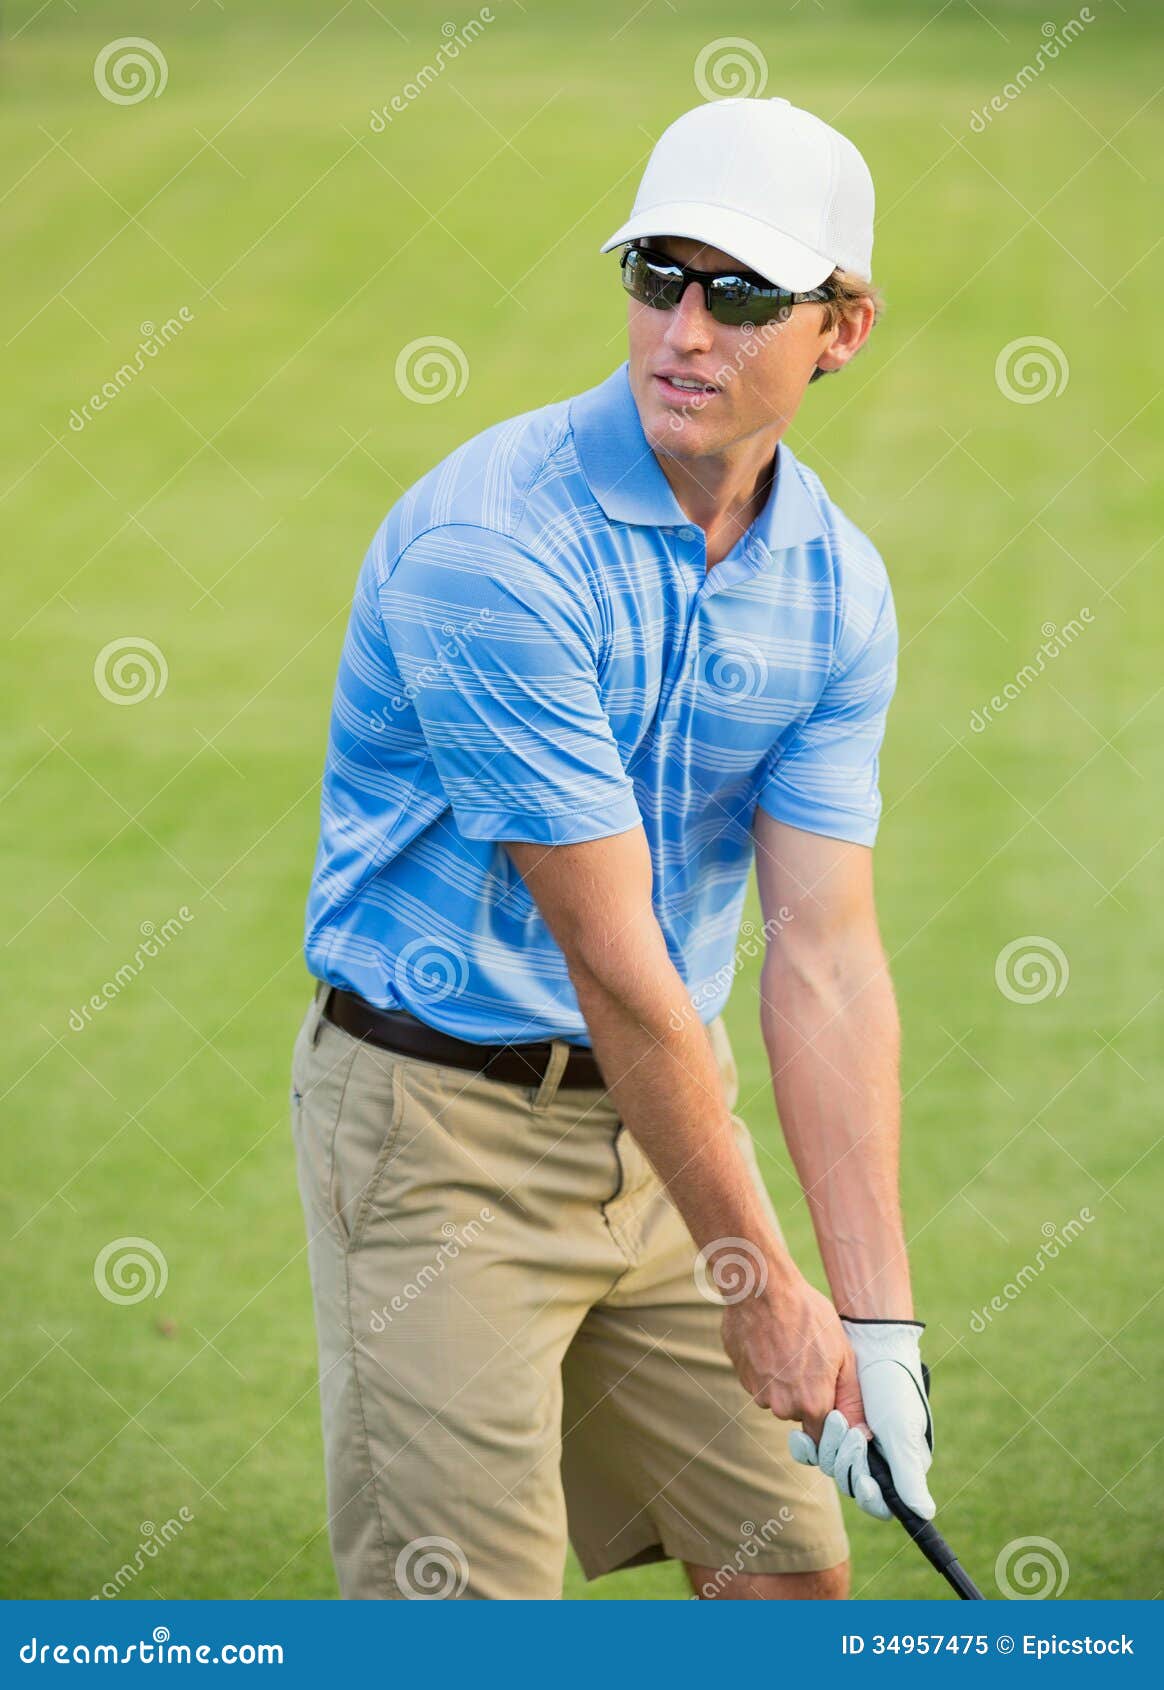 Athletic Young Man Playing Golf Stock Image - Image of nature, back ...